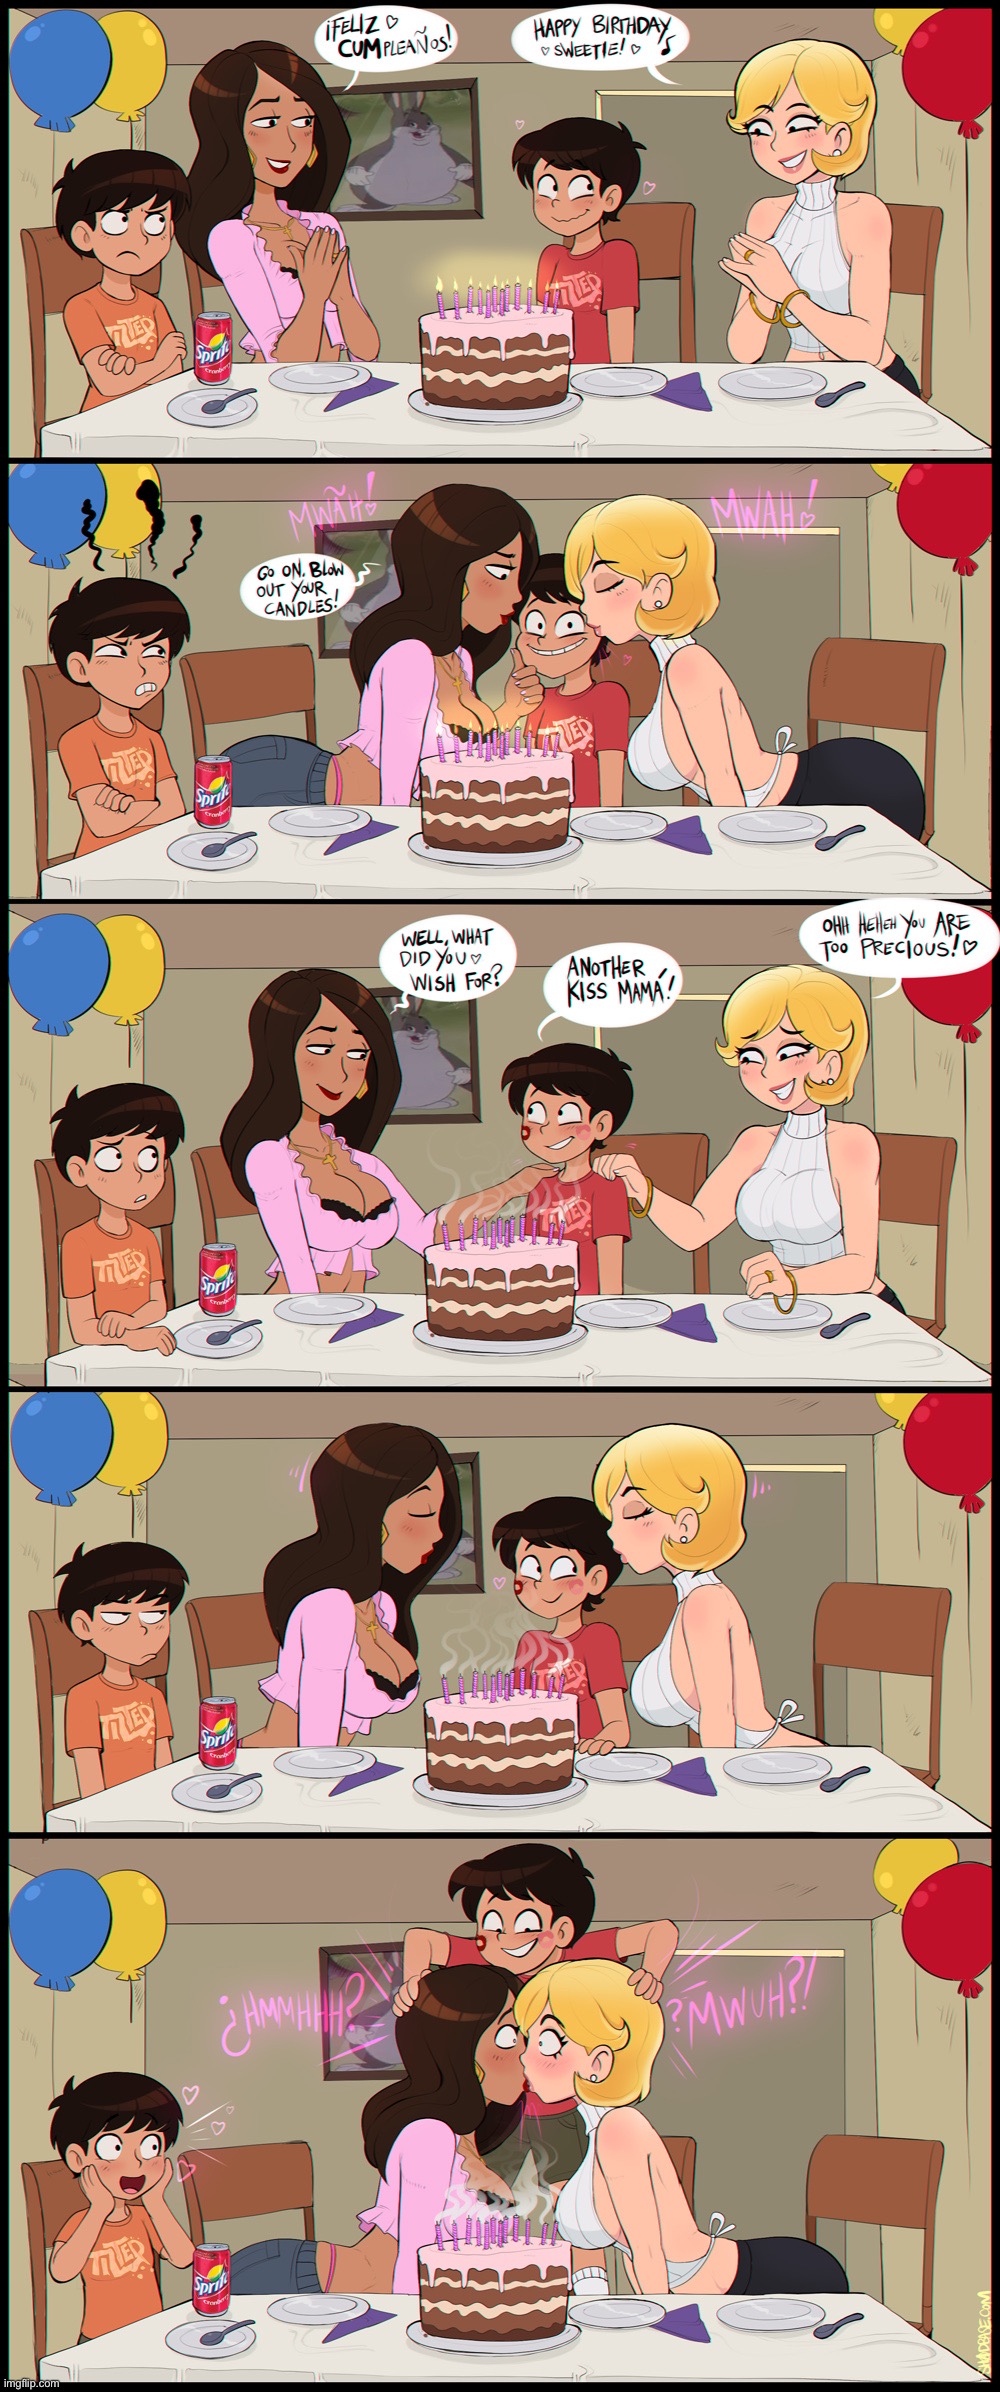 !!!BIRTHDAY WISH!!! | 👩🏽‍❤️‍💋‍👩🏼 | image tagged in happy birthday,birthday wishes,maternal nature,birthday,wish,kiss | made w/ Imgflip meme maker